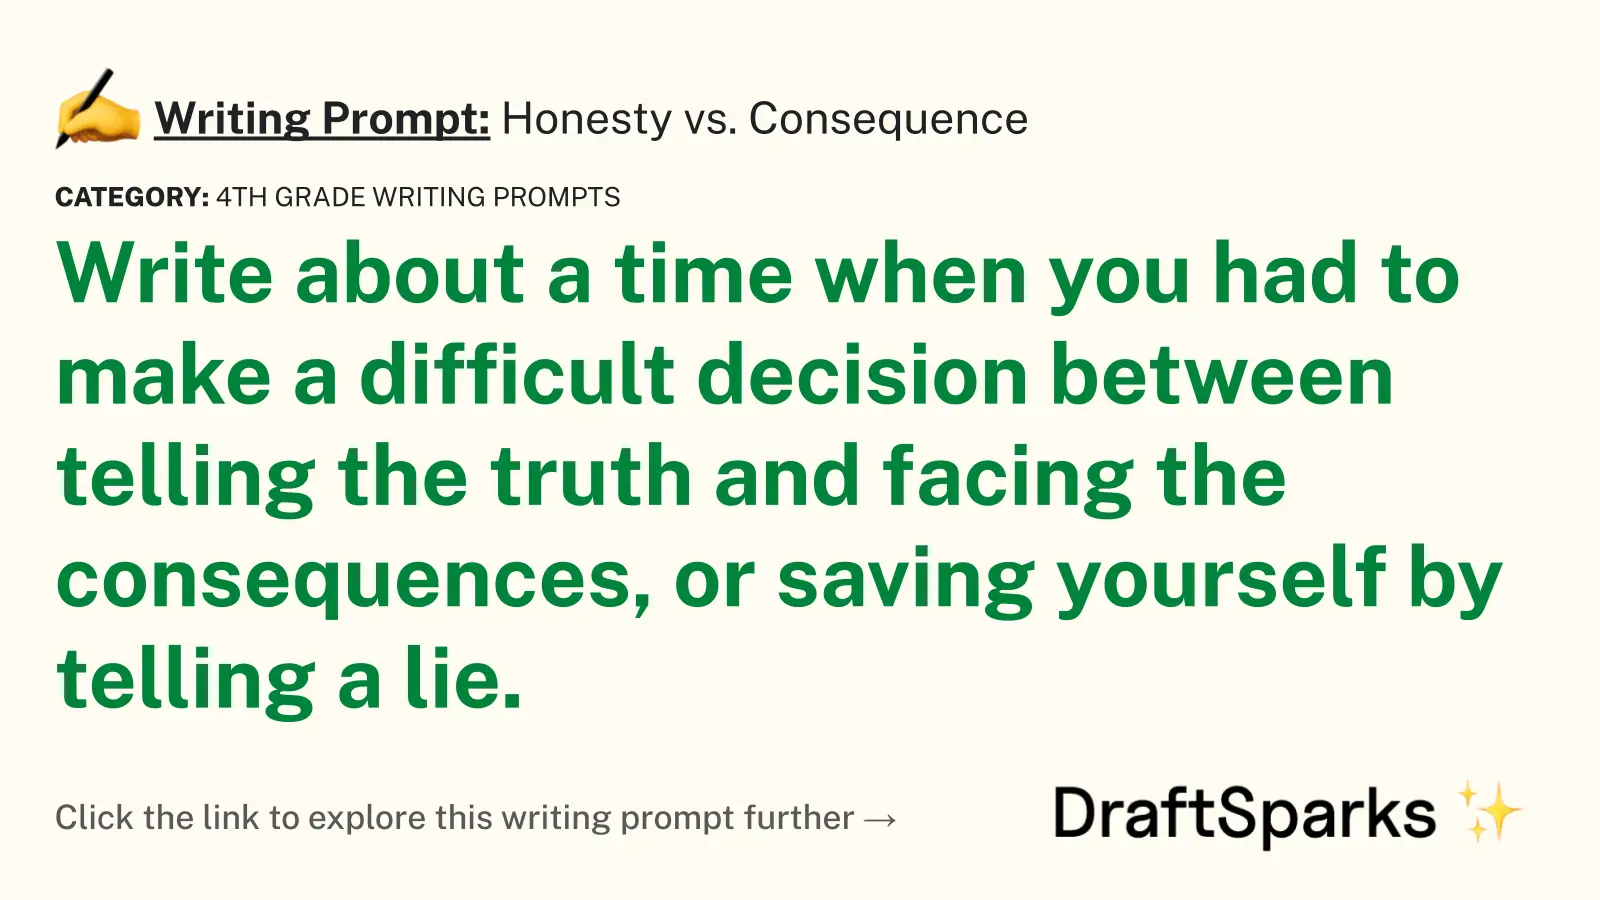 Honesty vs. Consequence